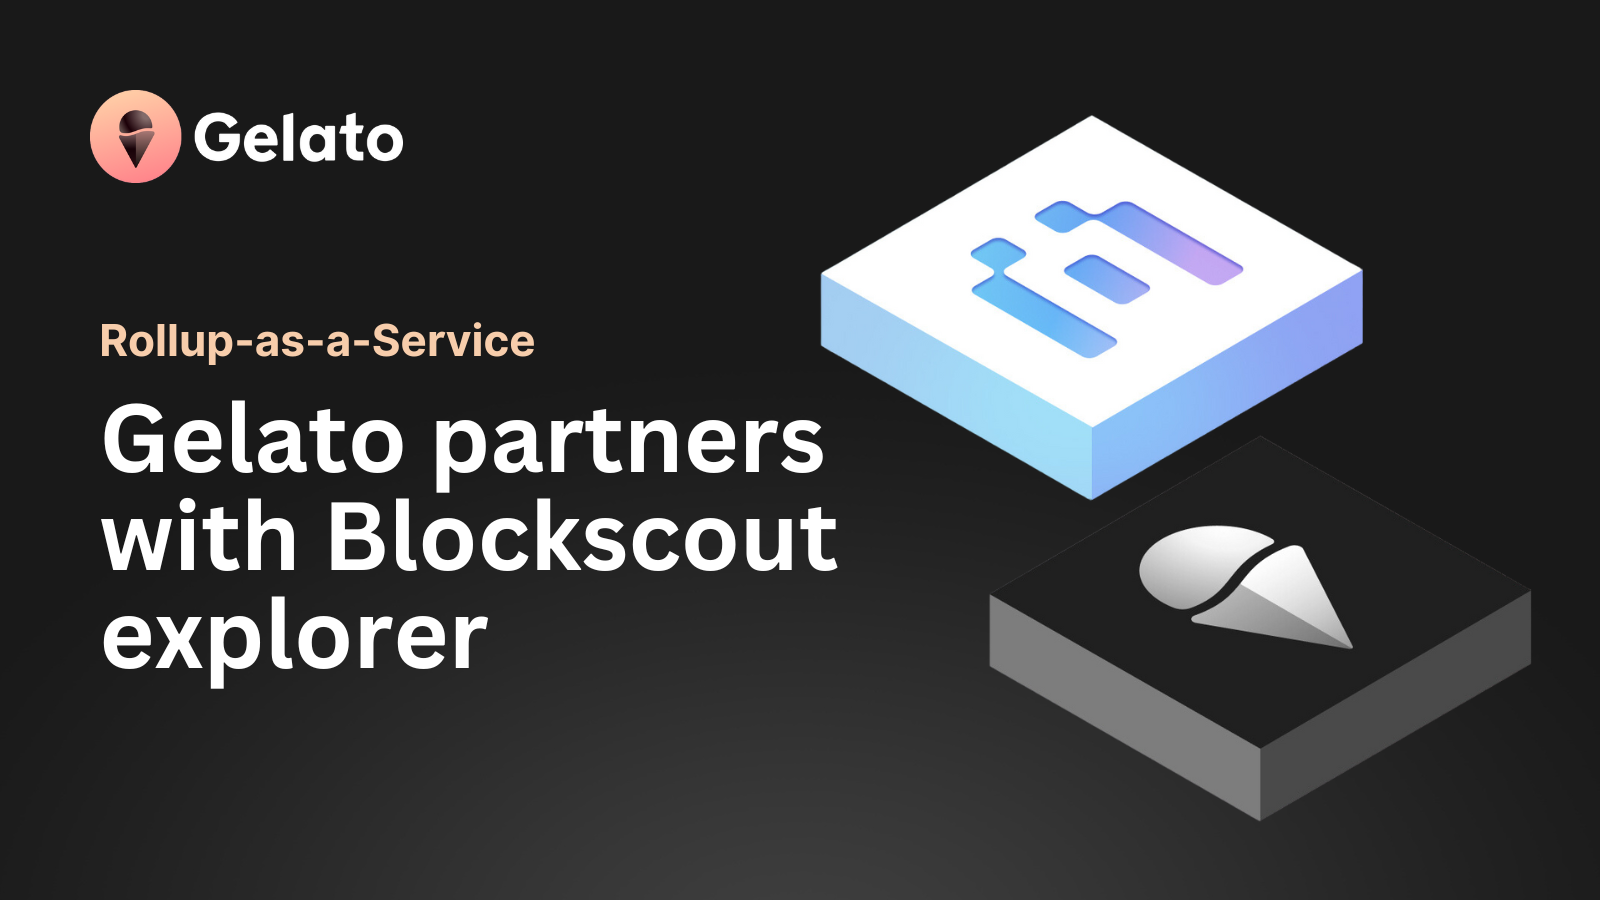 Gelato partners with Blockscout to bring explorer-as-a-service to L2 chains